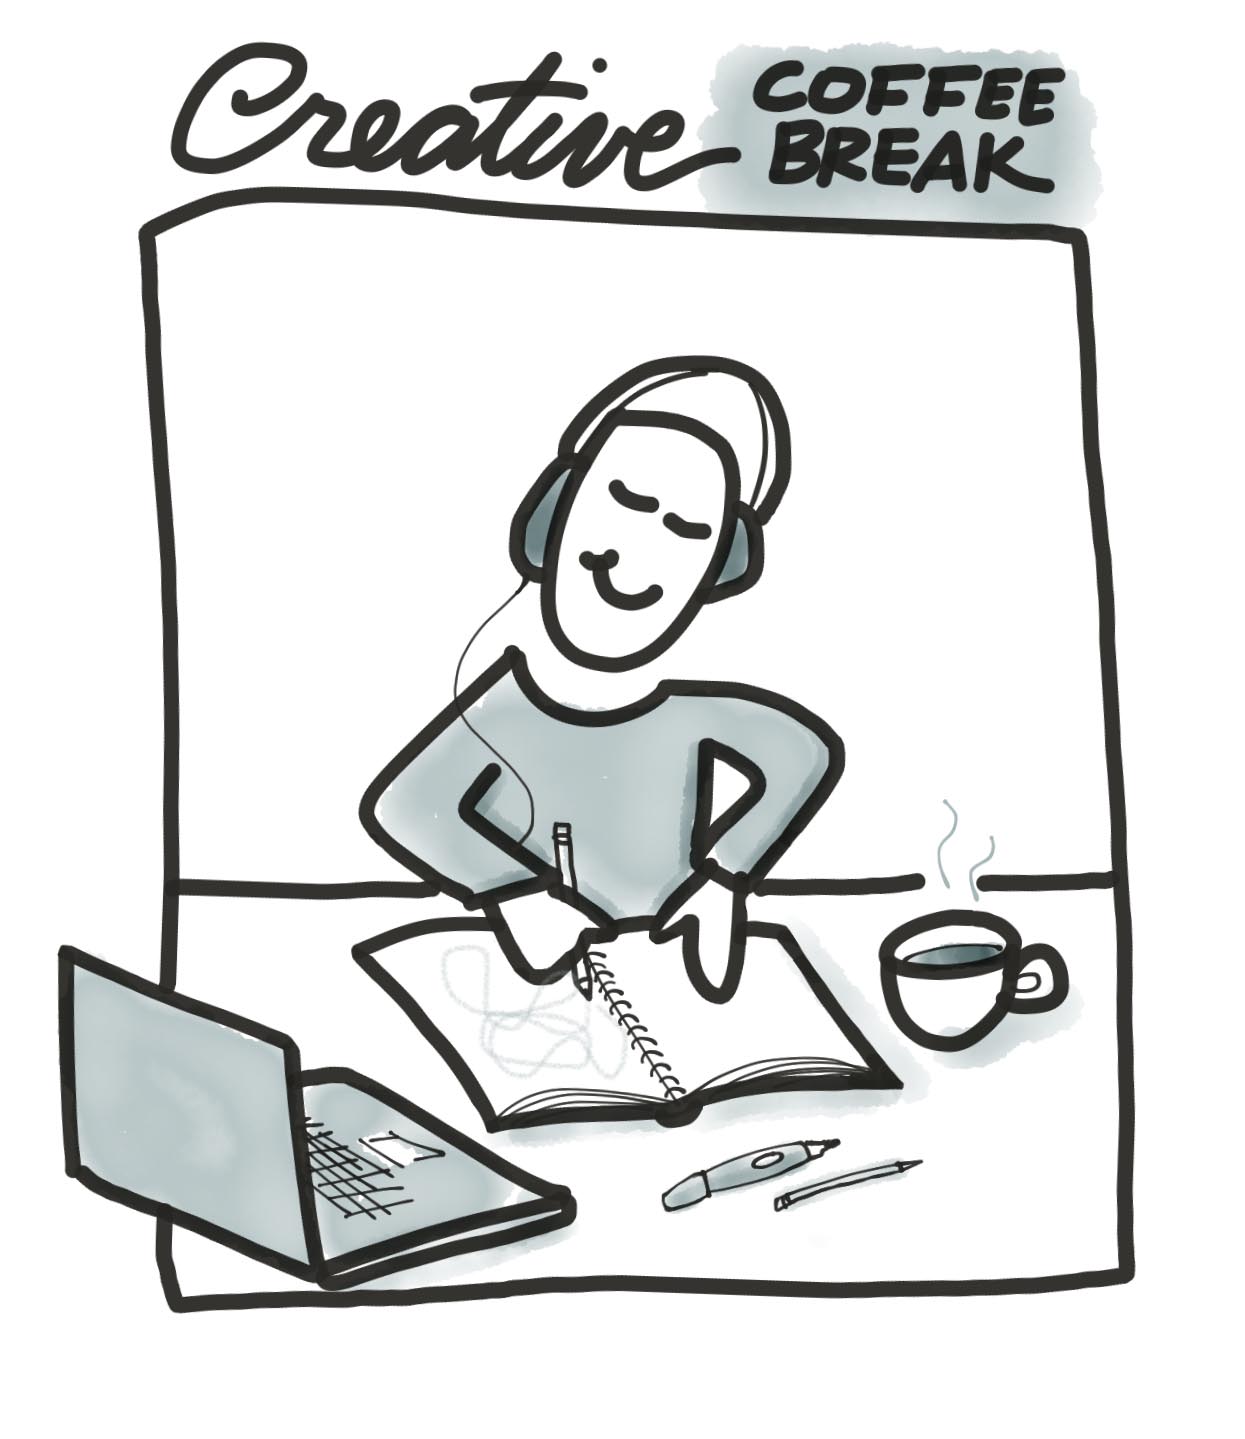 Have a creative coffe break with this creativity challenge